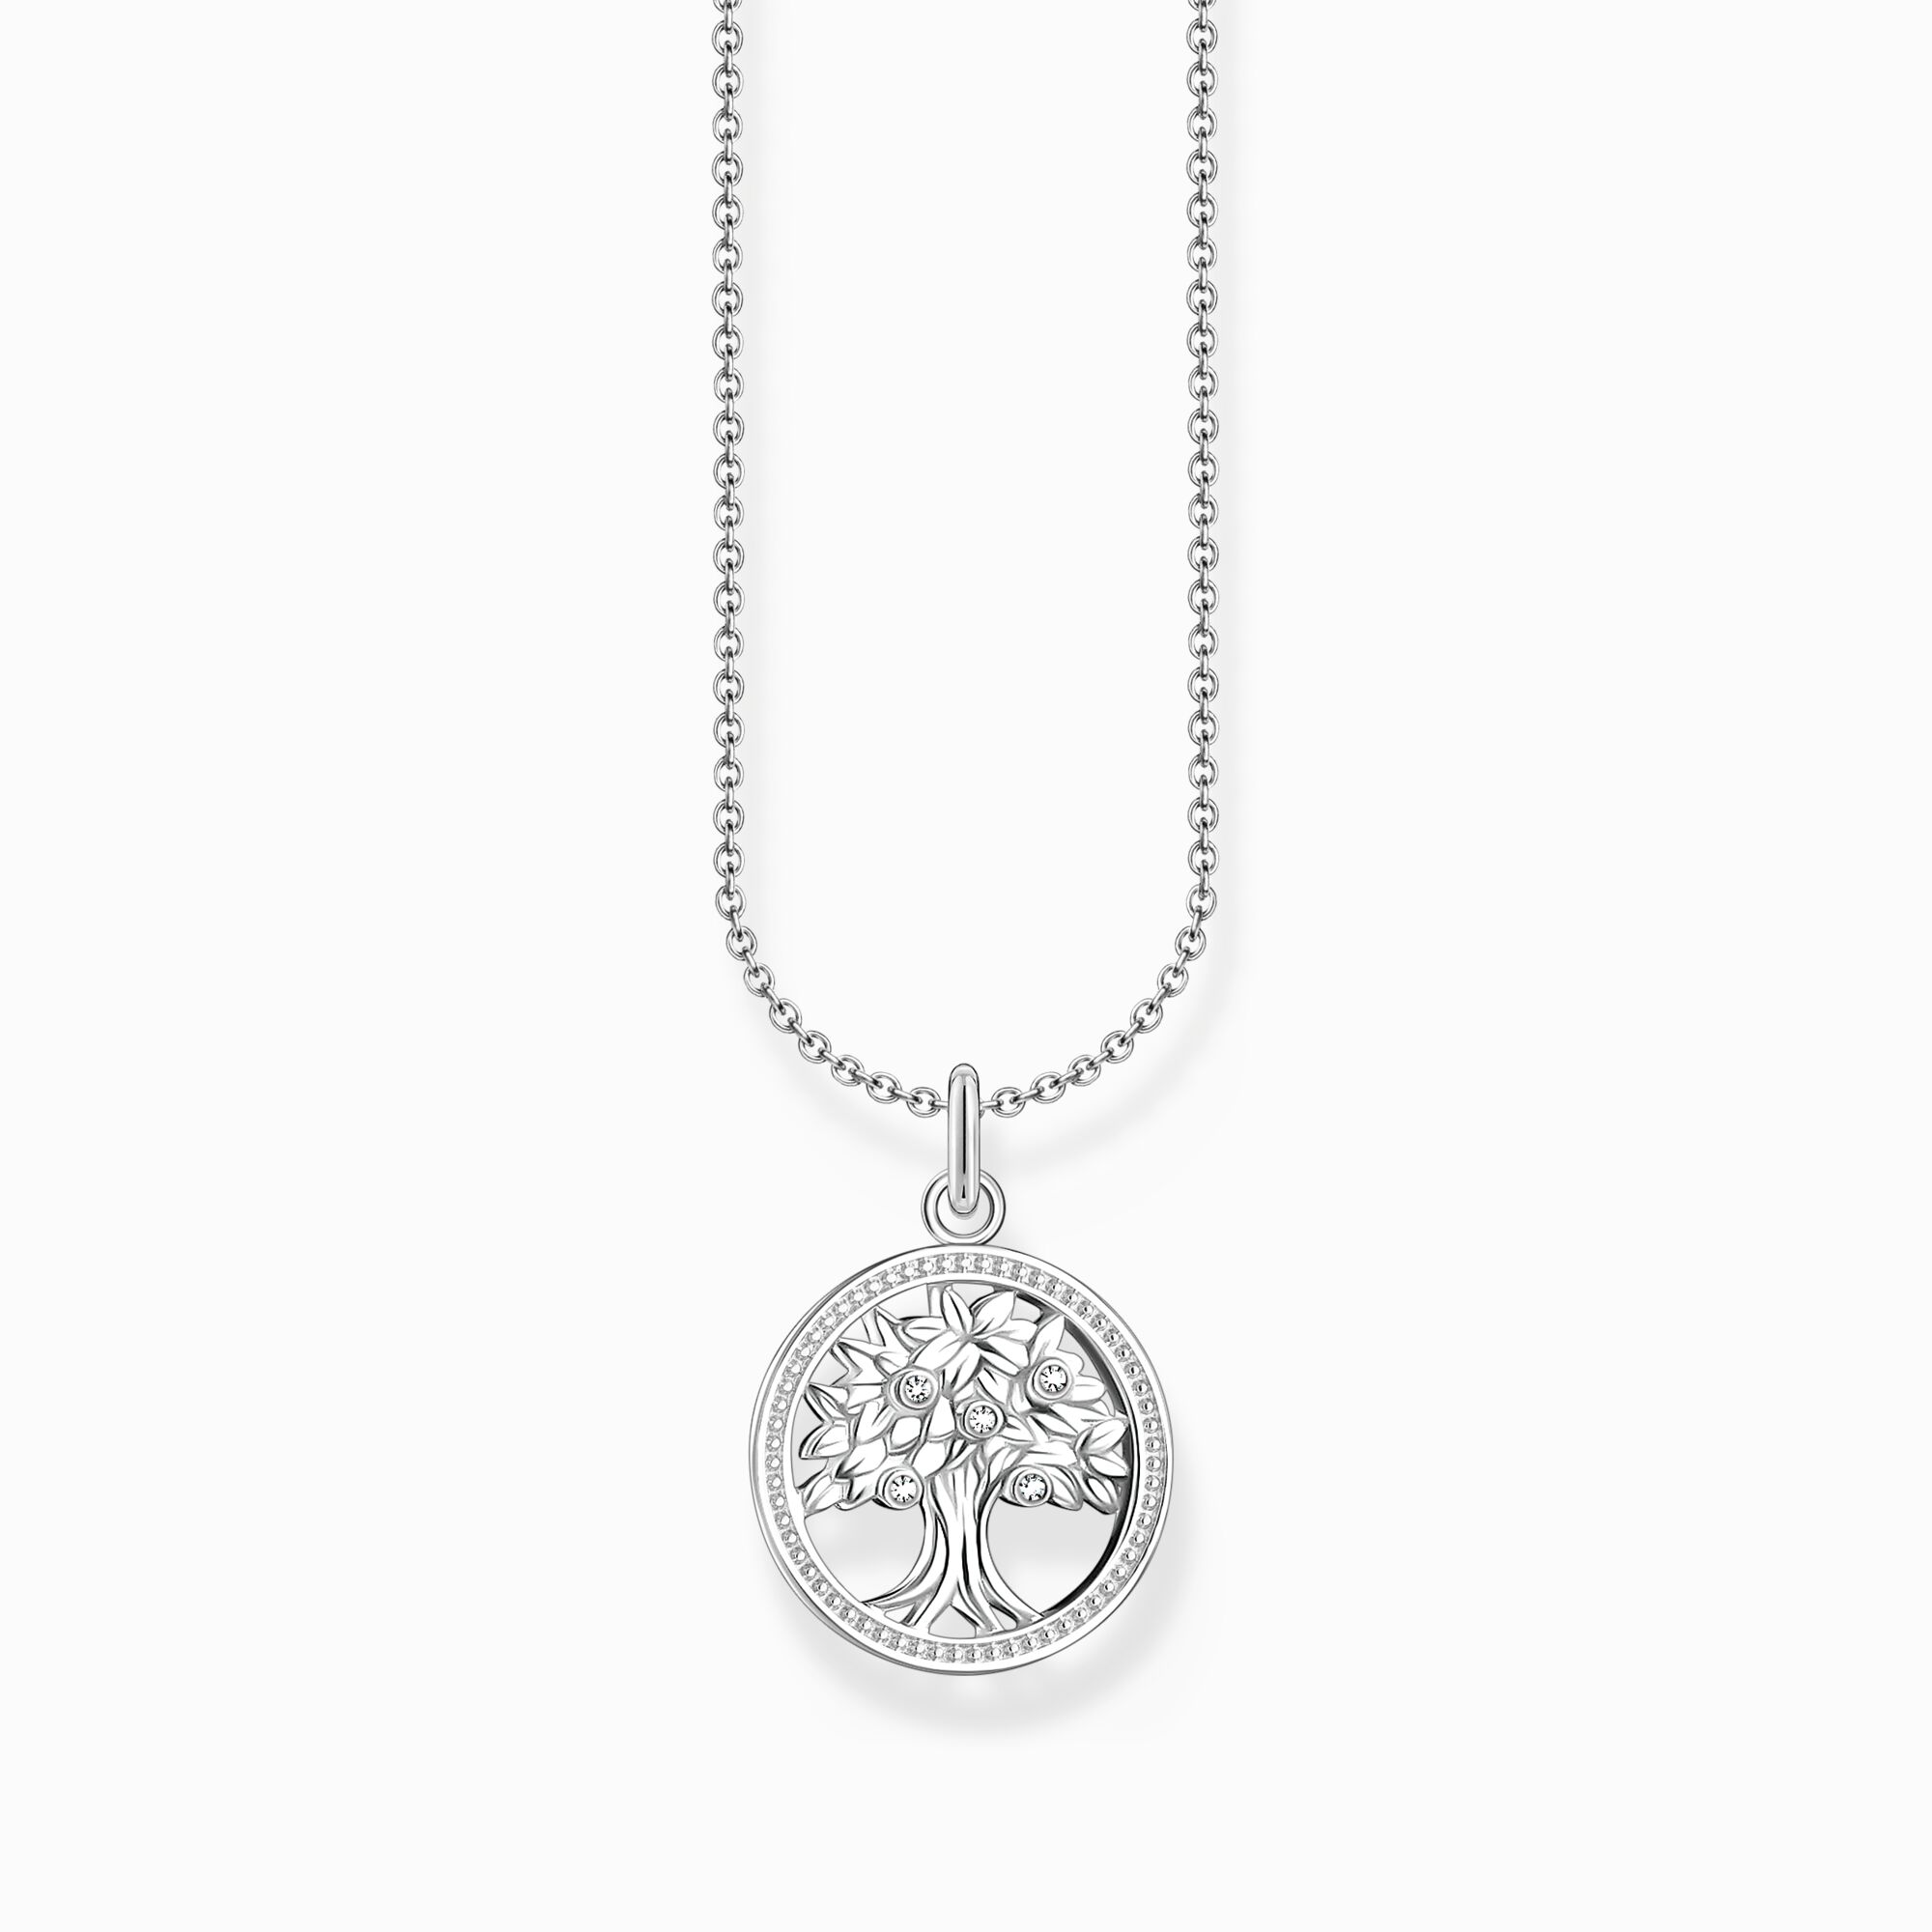 Silver necklace with tree of love pendant and white zirconia from the Charming Collection collection in the THOMAS SABO online store